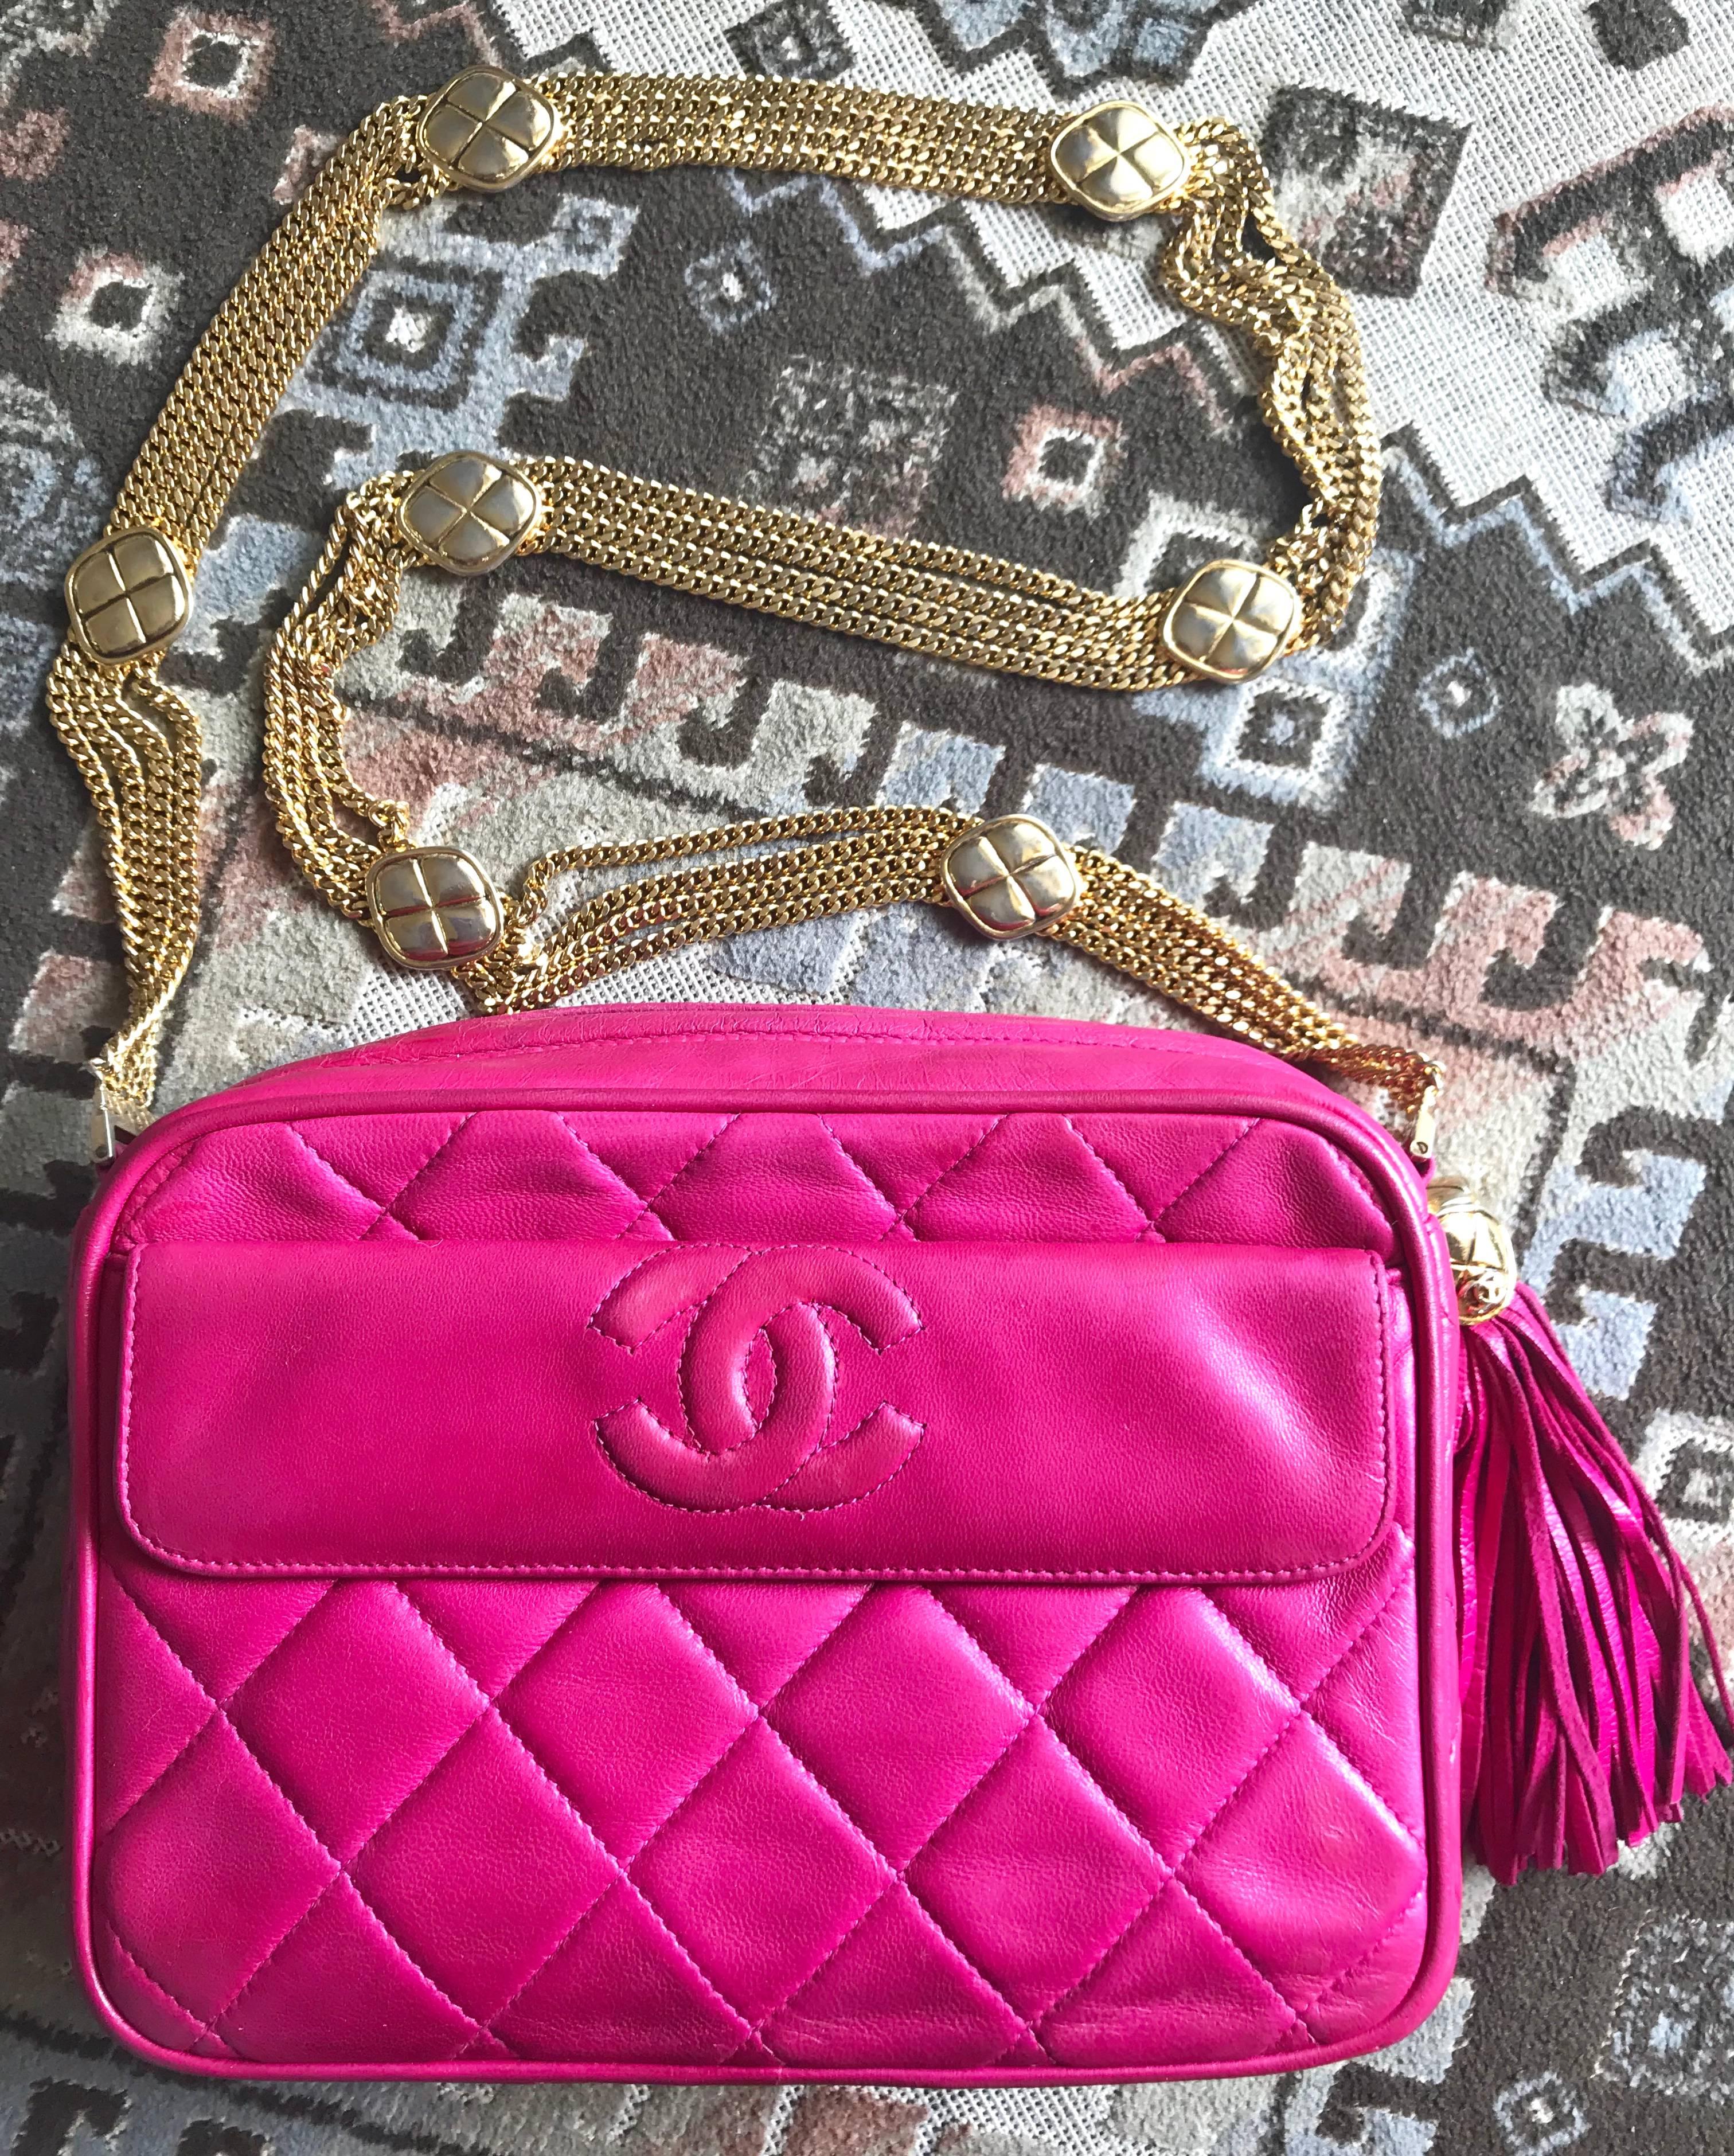 1990s. Vintage CHANEL pink leather camera bag style shoulder bag with a tassel, CC mark, and multiple layer chain strap. Rare masterpiece.

Introducing one-of-a-kind, rare vintage purse from CHANEL back in the early 90's.
Vintage lambskin pink